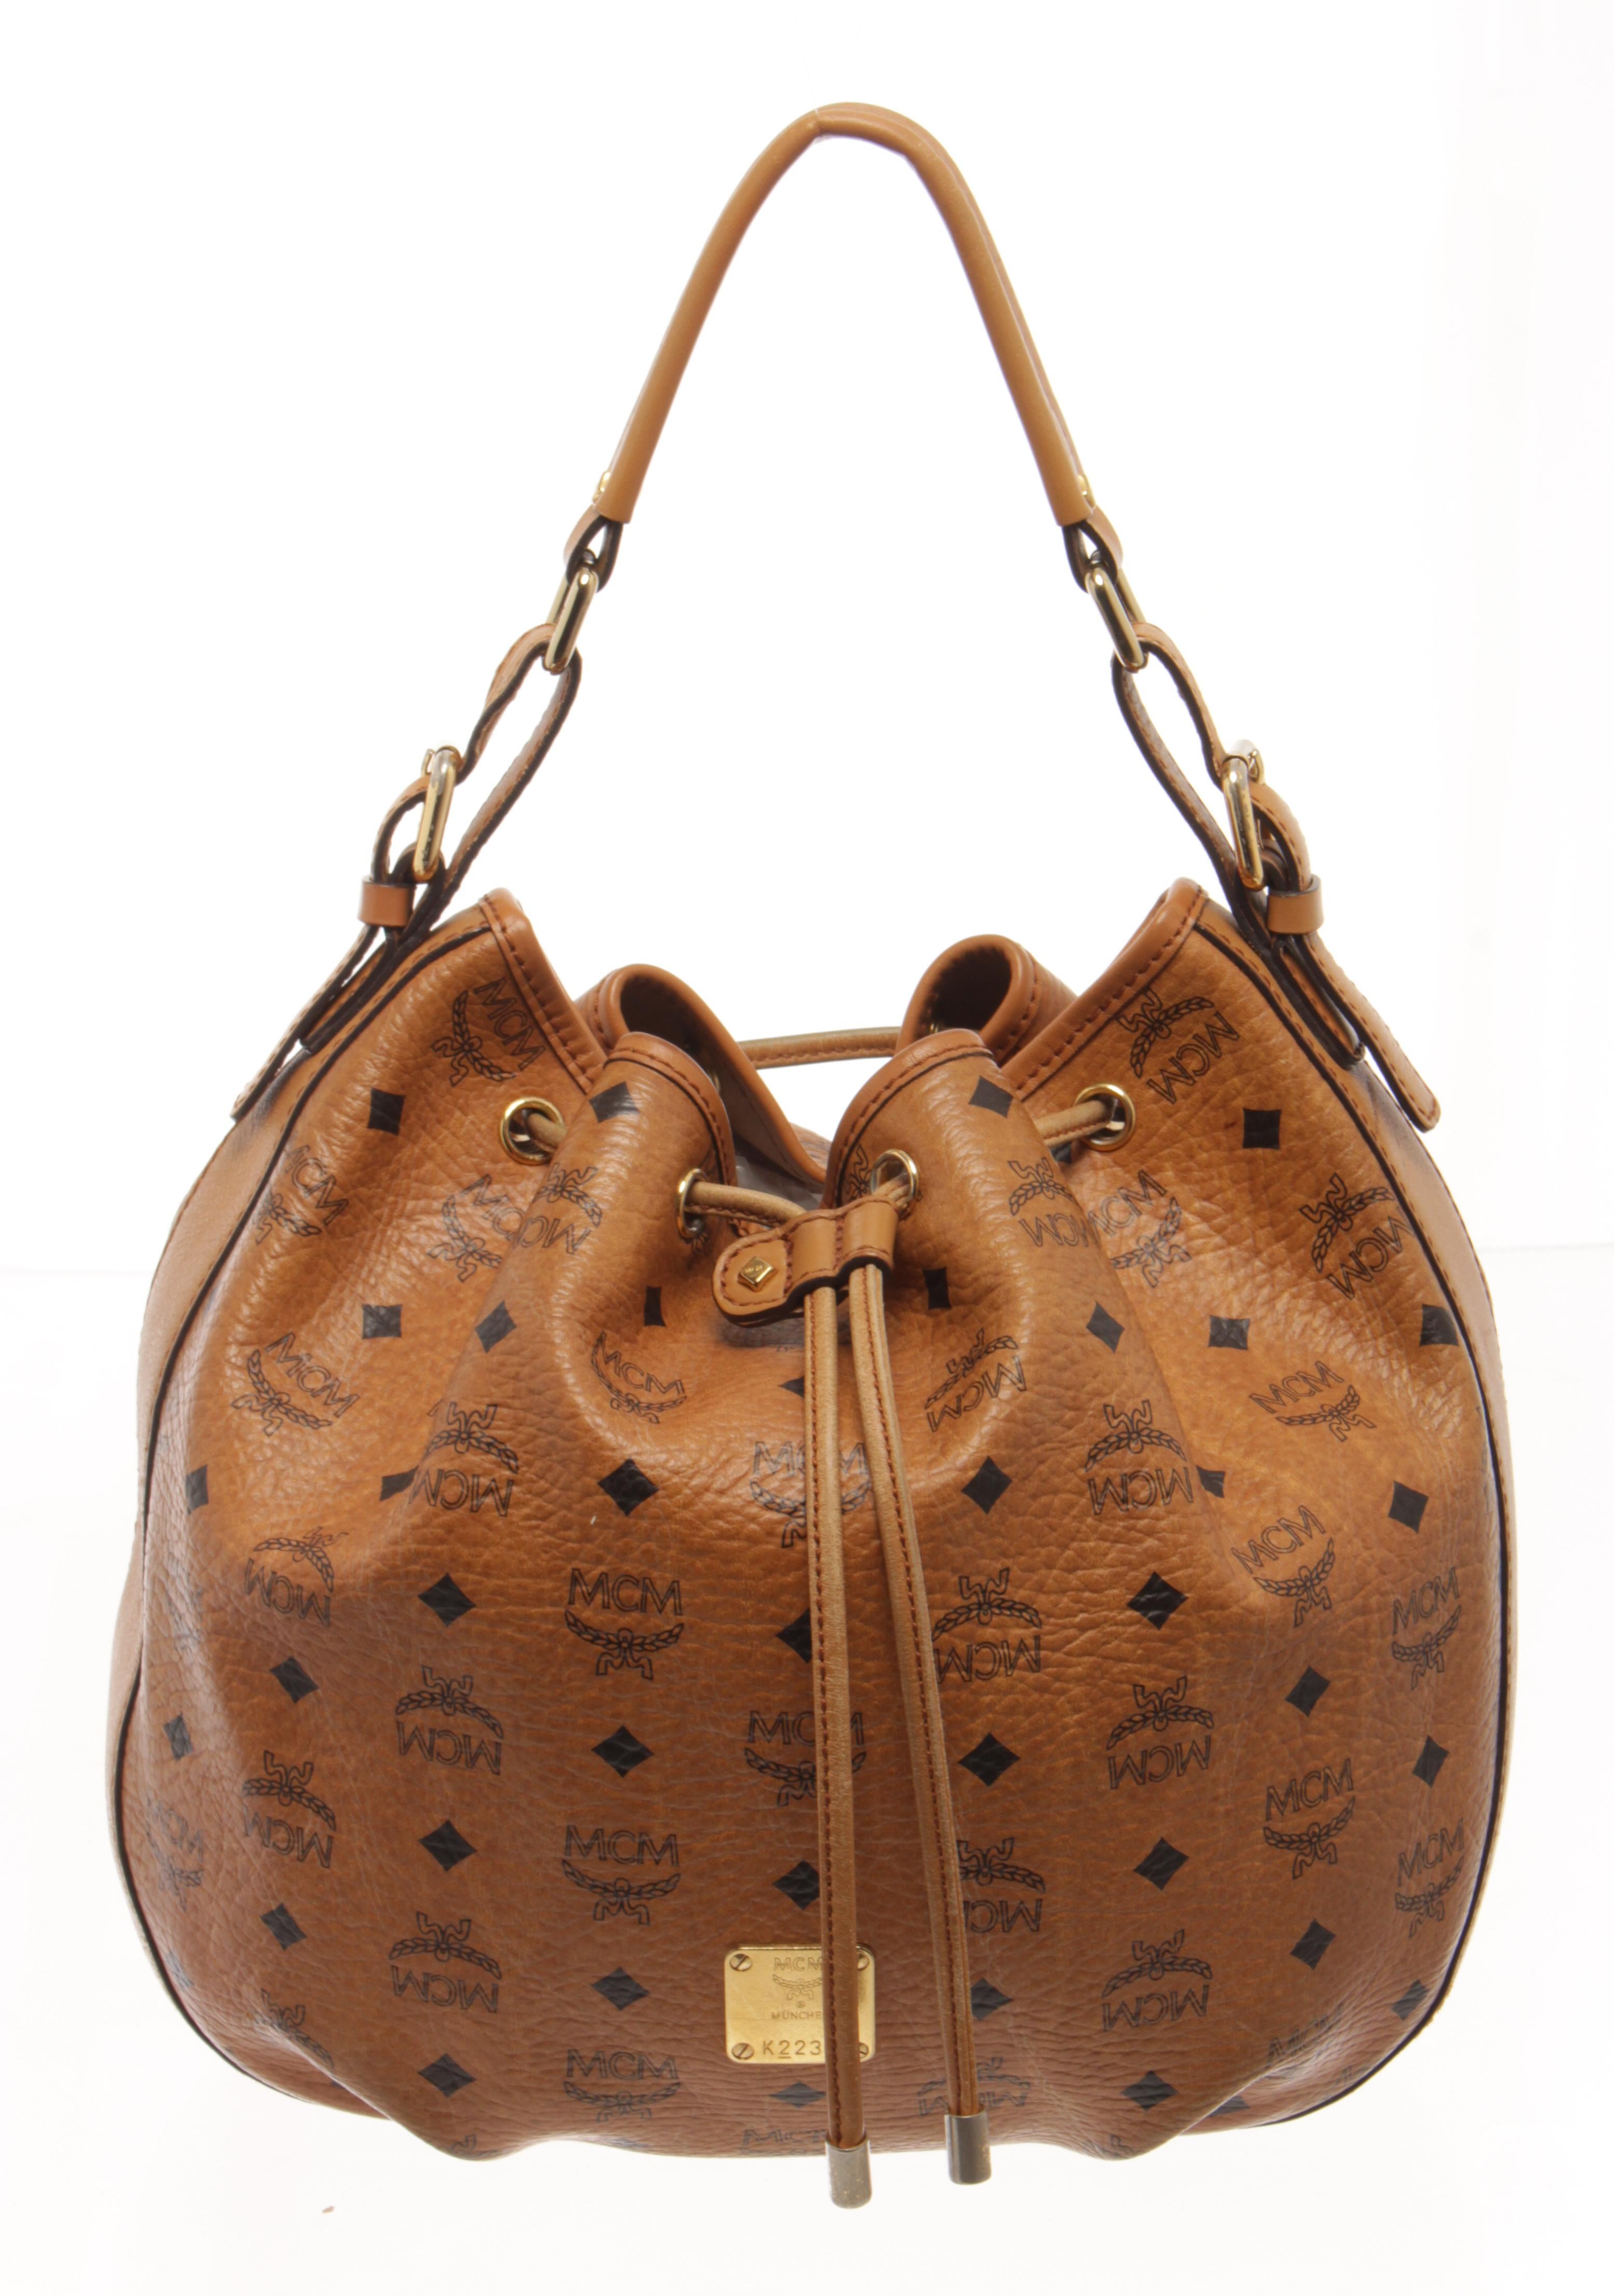 MCM Cognac Visetos Leather Bucket Bag with dark gold-toned hardware, interior side zip pocket and open pocket, visetos coated canvas and trimmed in rich nappa leather, drawstring fastening with concealed magnetic closure, removable top handle,